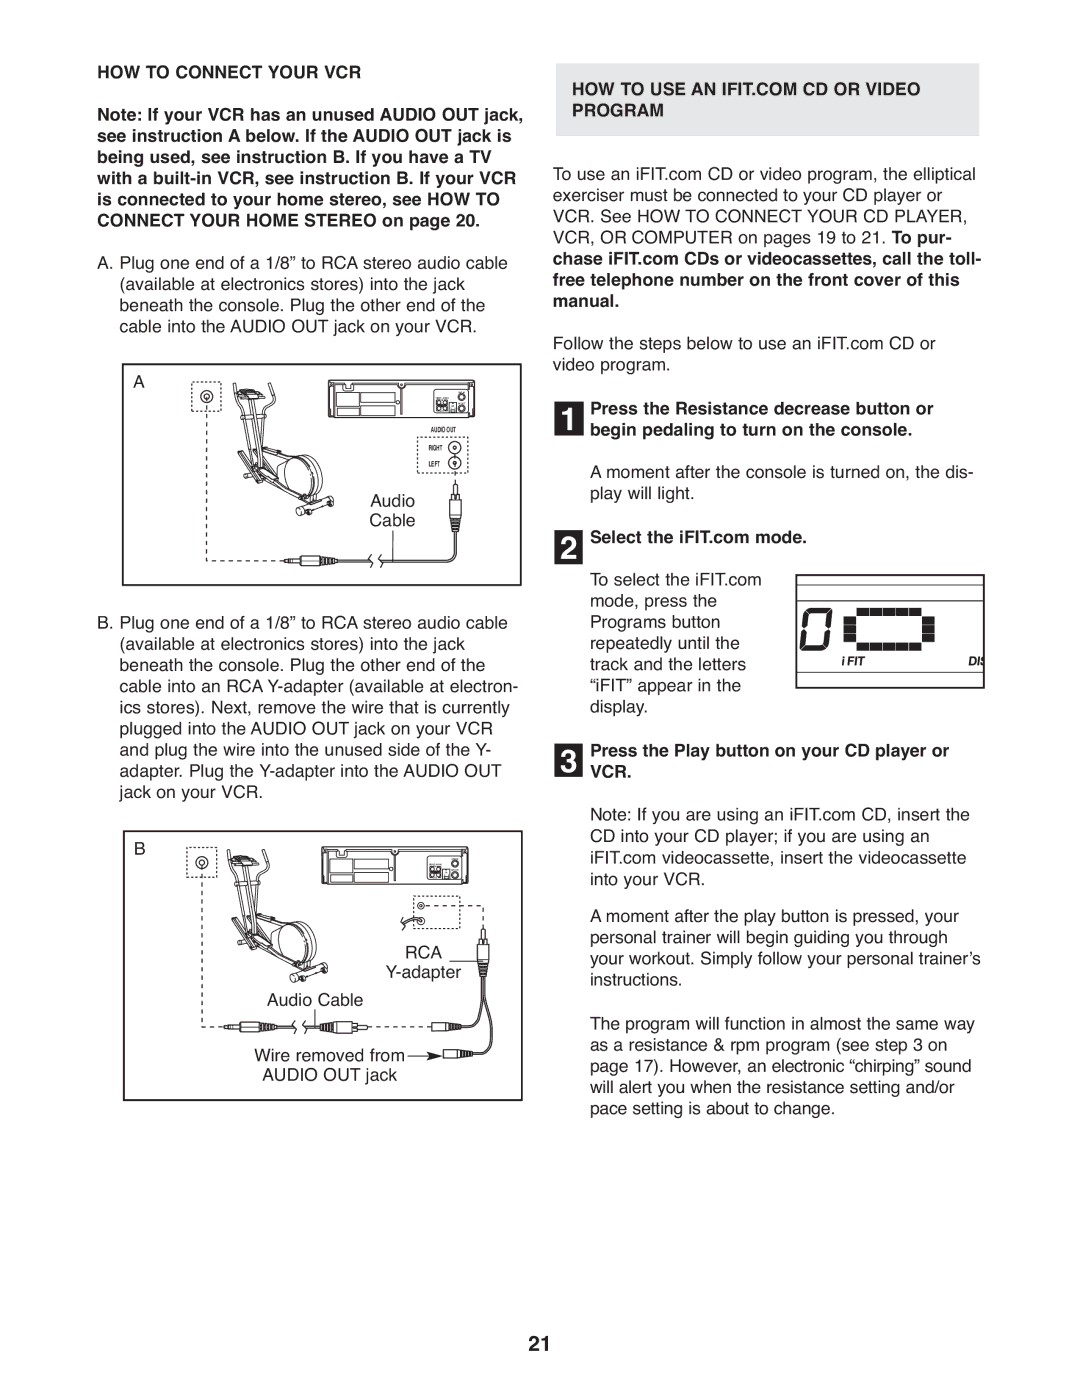 ProForm 831.28544.0 user manual HOW to Connect Your VCR, Press the Play button on your CD player or VCR 